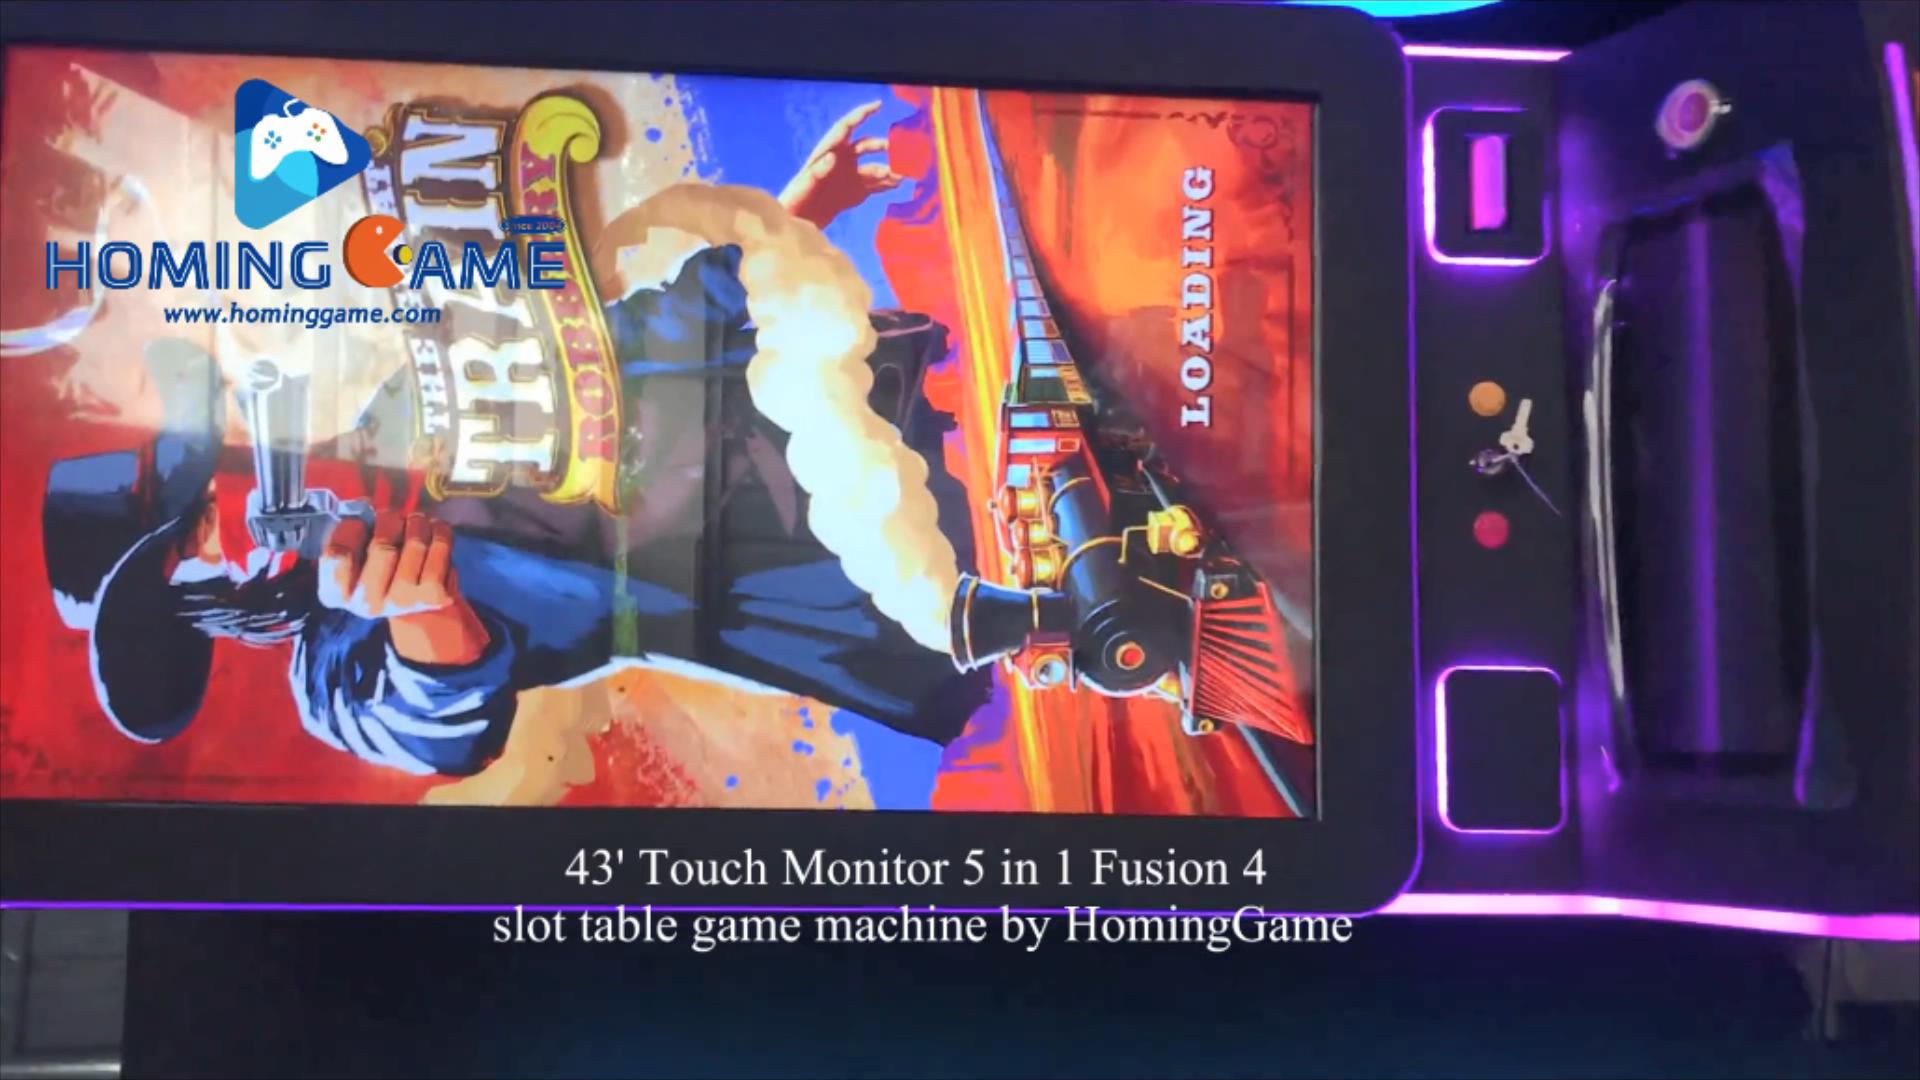 2021 Hot Sale 43' Touch 5-in-1 Slot Game Machine by HomingGame